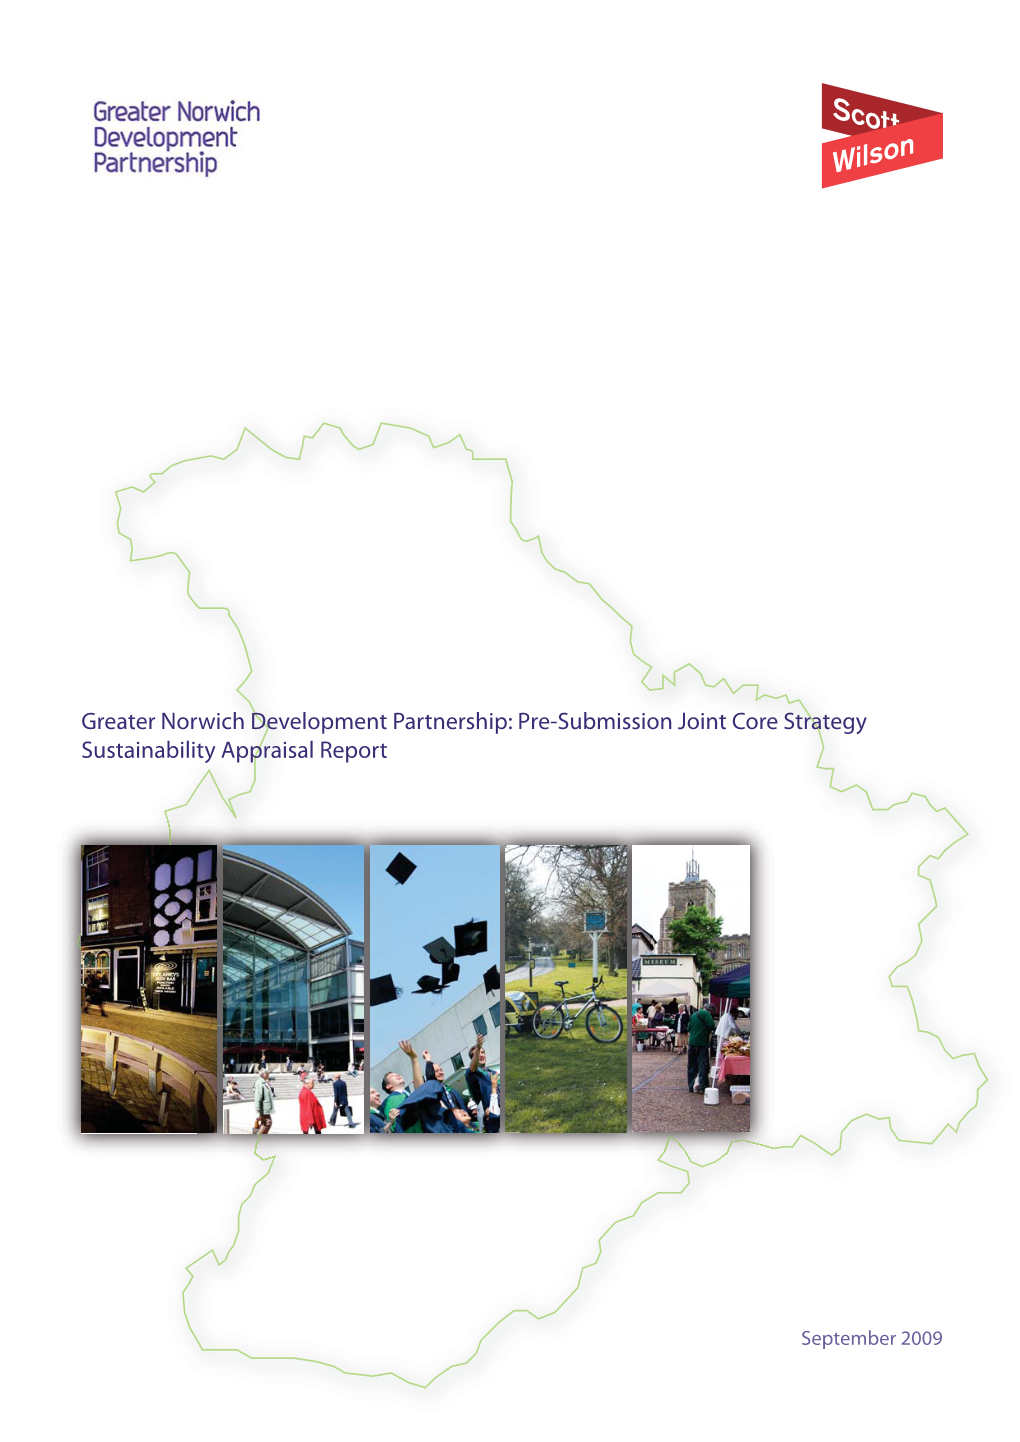 Greater Norwich Development Partnership: Pre-Submission Joint Core Strategy Sustainability Appraisal Report